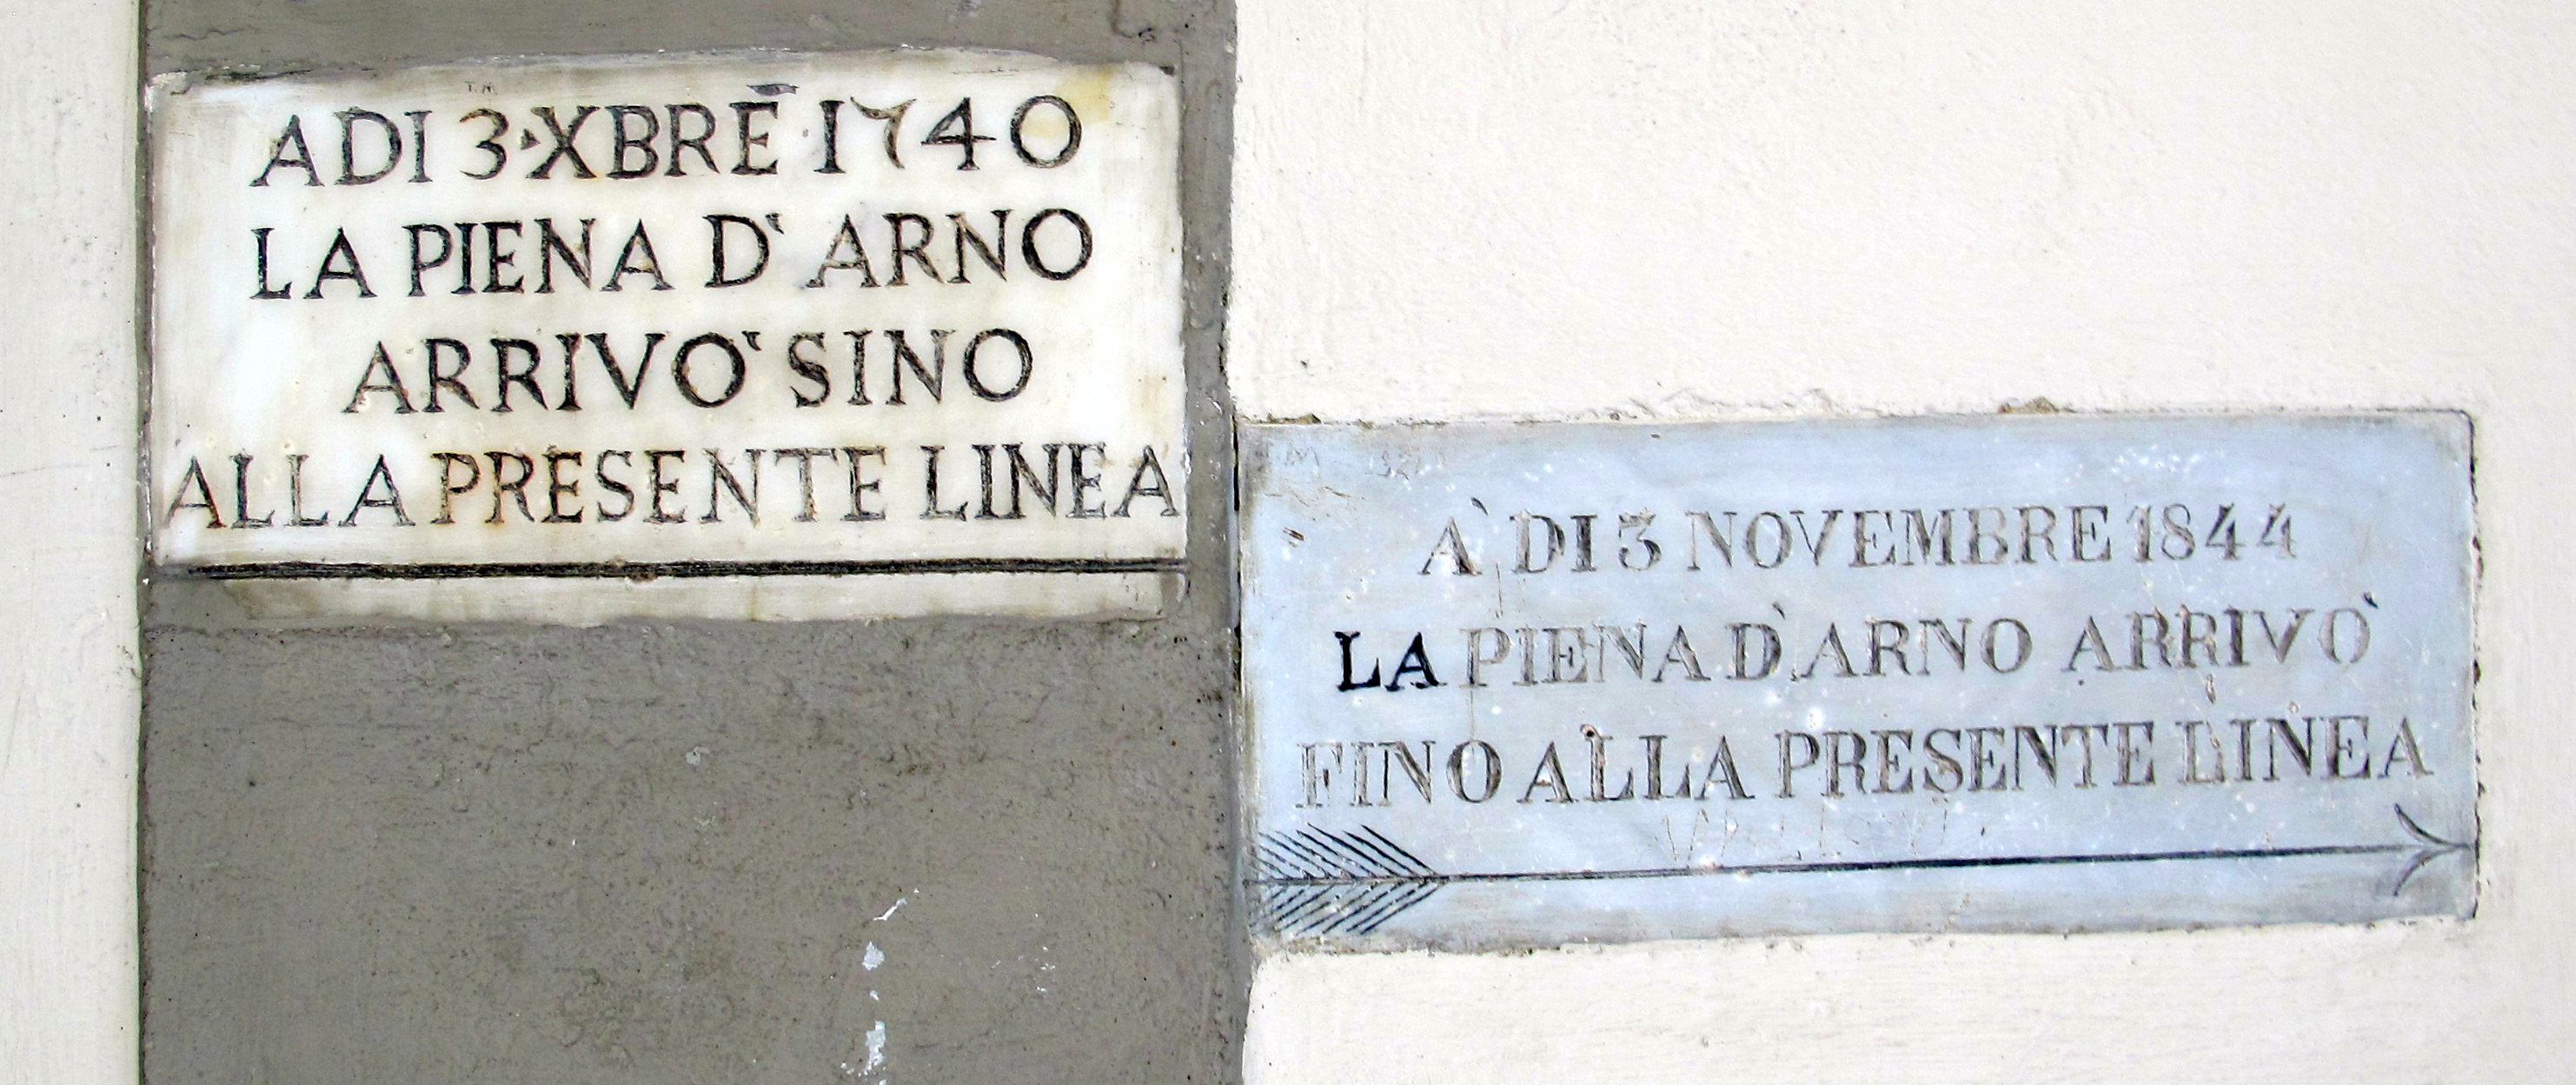 Florence, Via de' Benci, two plaques record the level reached by the water in the 1740 and 1844 floods. Source: I, Sailko, released under CC BY-SA 3.0 via Wikimedia Commons (https://commons.wikimedia.org/wiki/File:San_jacopo_tra_i_fossi,_chiostro,_targhe_alluvioni_1740_e_1844,_02.JPG).